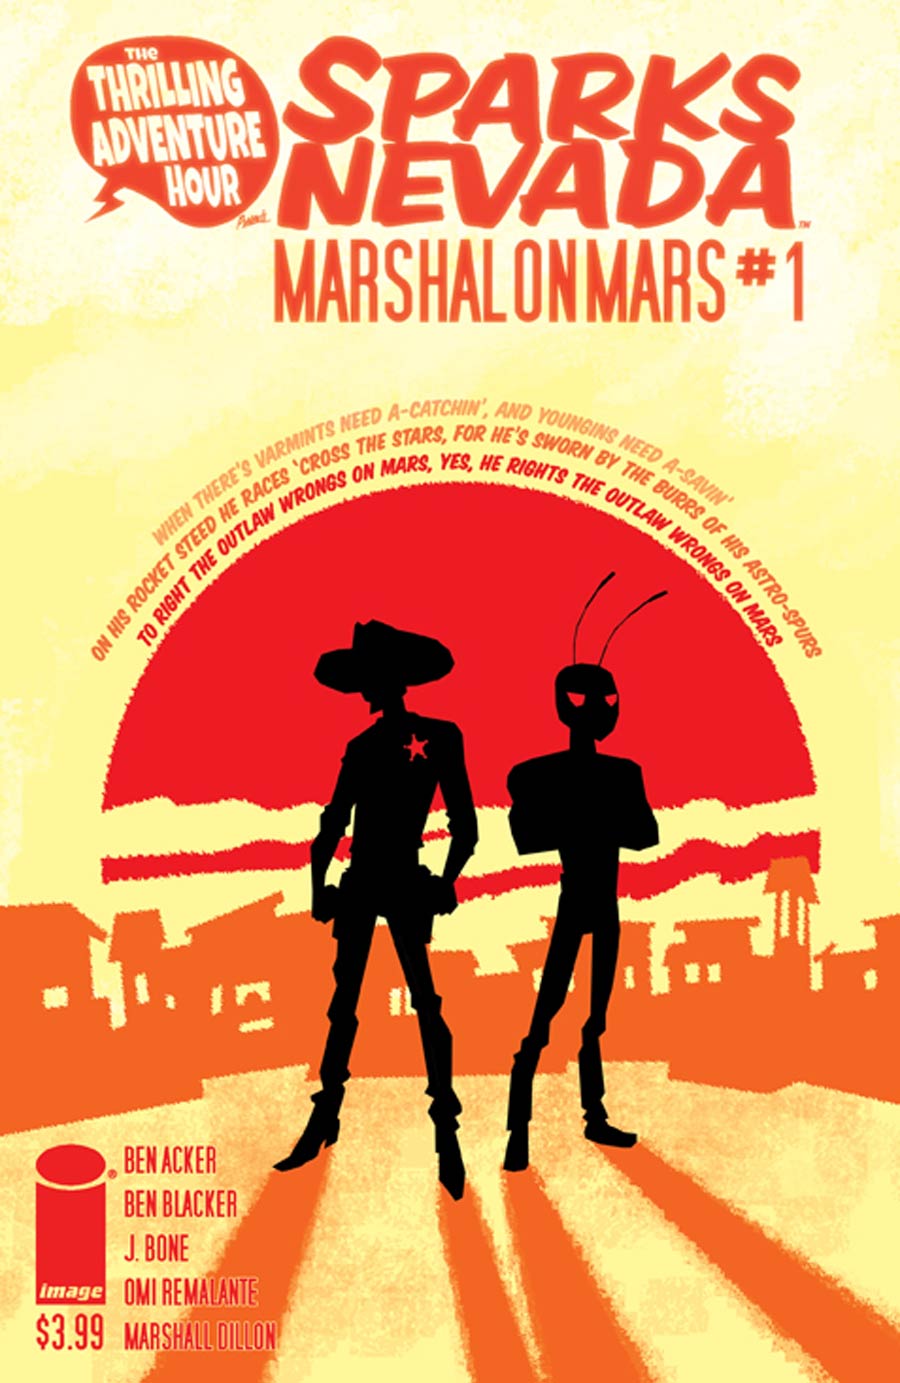 Thrilling Adventure Hour Presents Sparks Nevada Marshal On Mars #1 Cover A J Bone